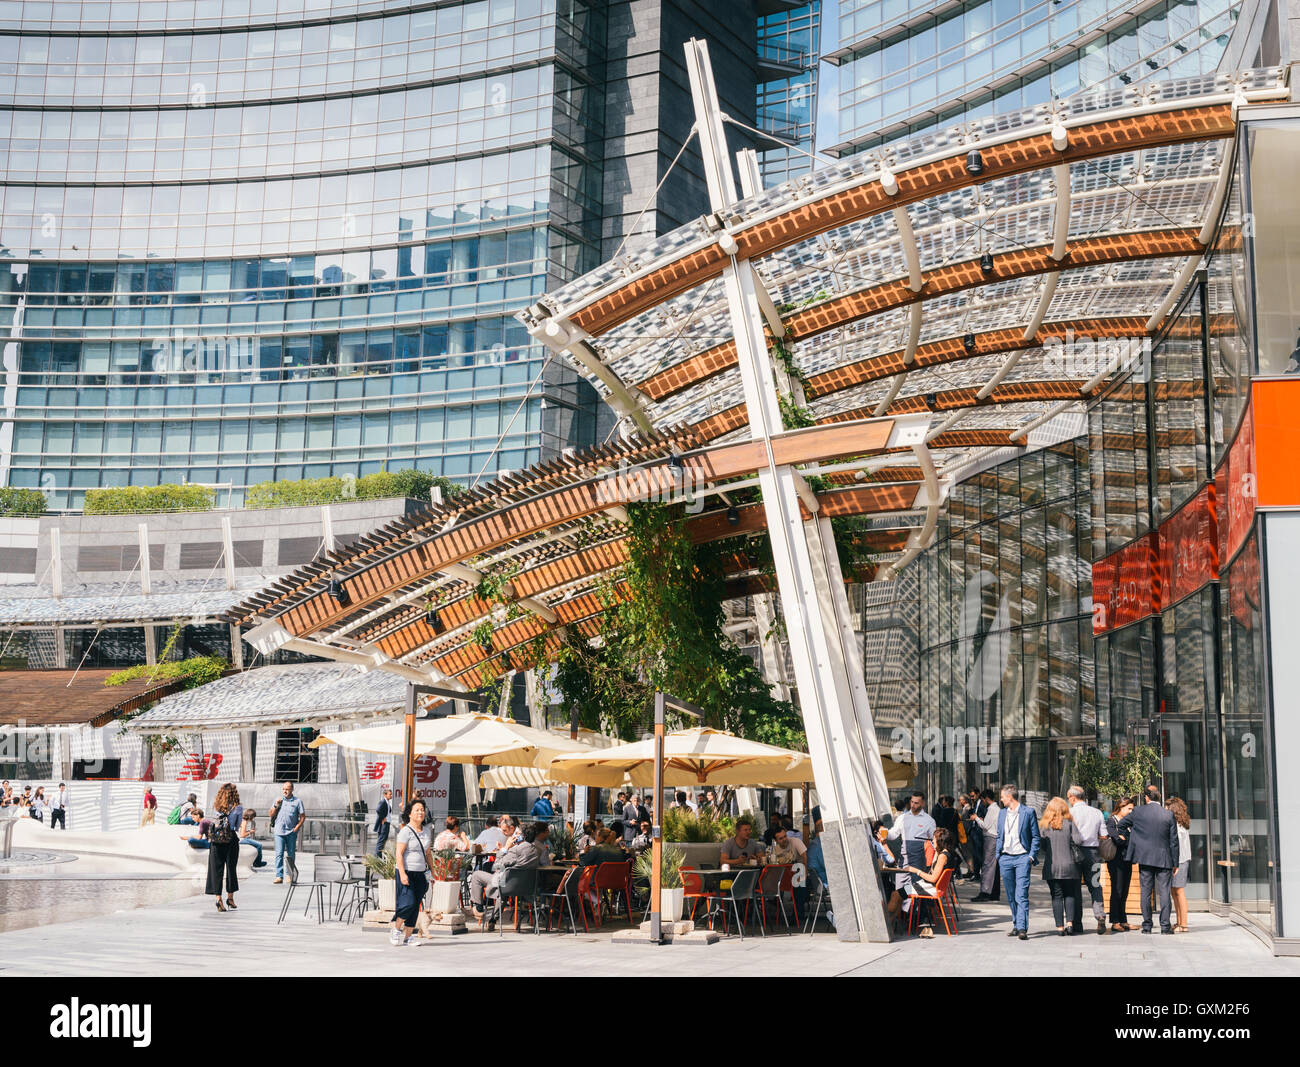 Piazza Gae Aulenti in Milan (Gae Aulenti square), new gateway to one of European s most stylish cities Stock Photo